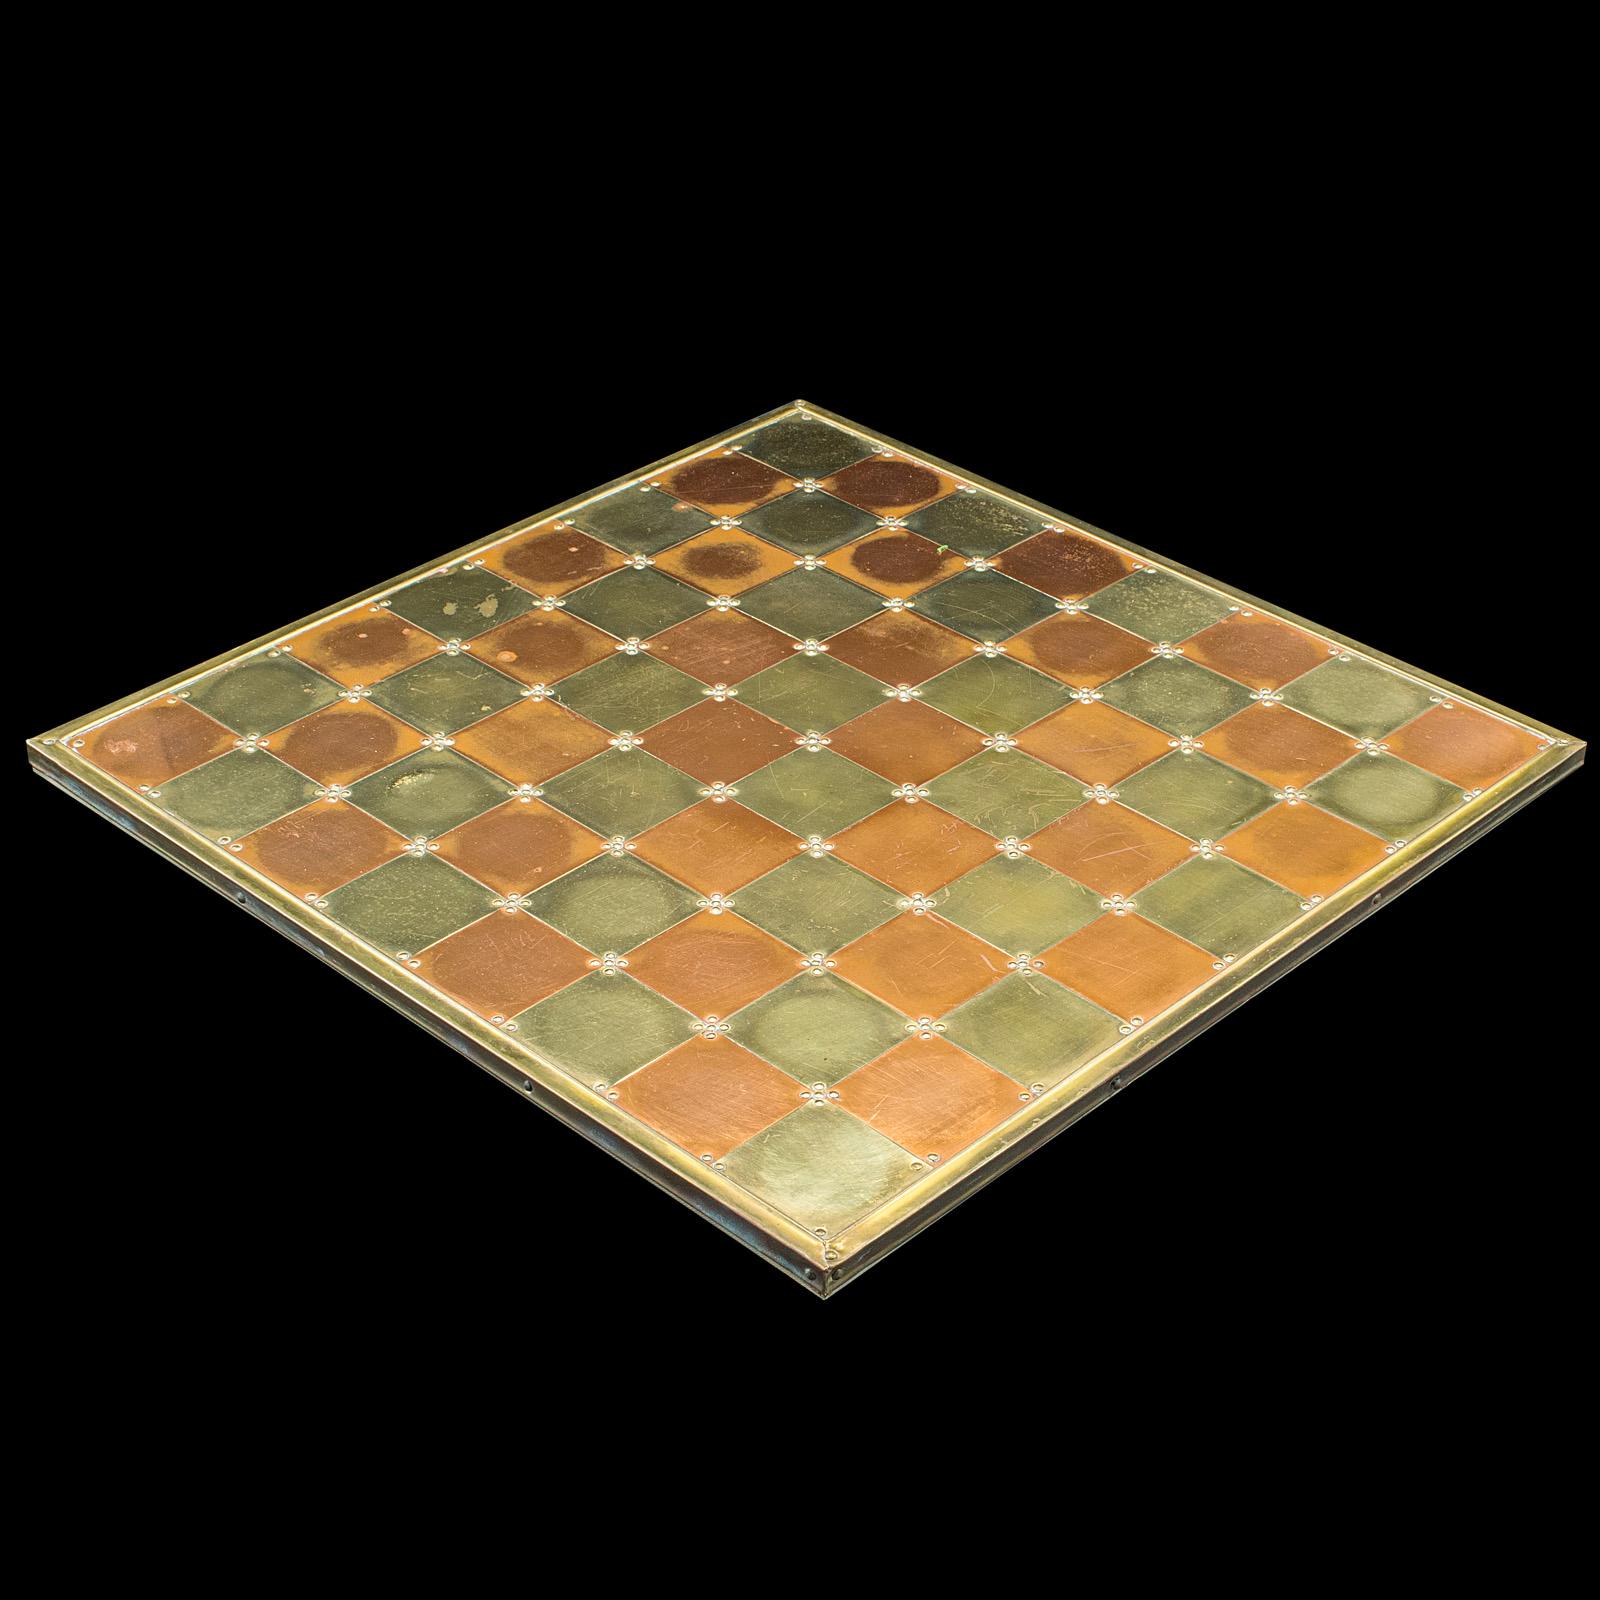 Large Vintage Chess Board, English, Brass, Copper, Gaming Set, Late 20th Century For Sale 1